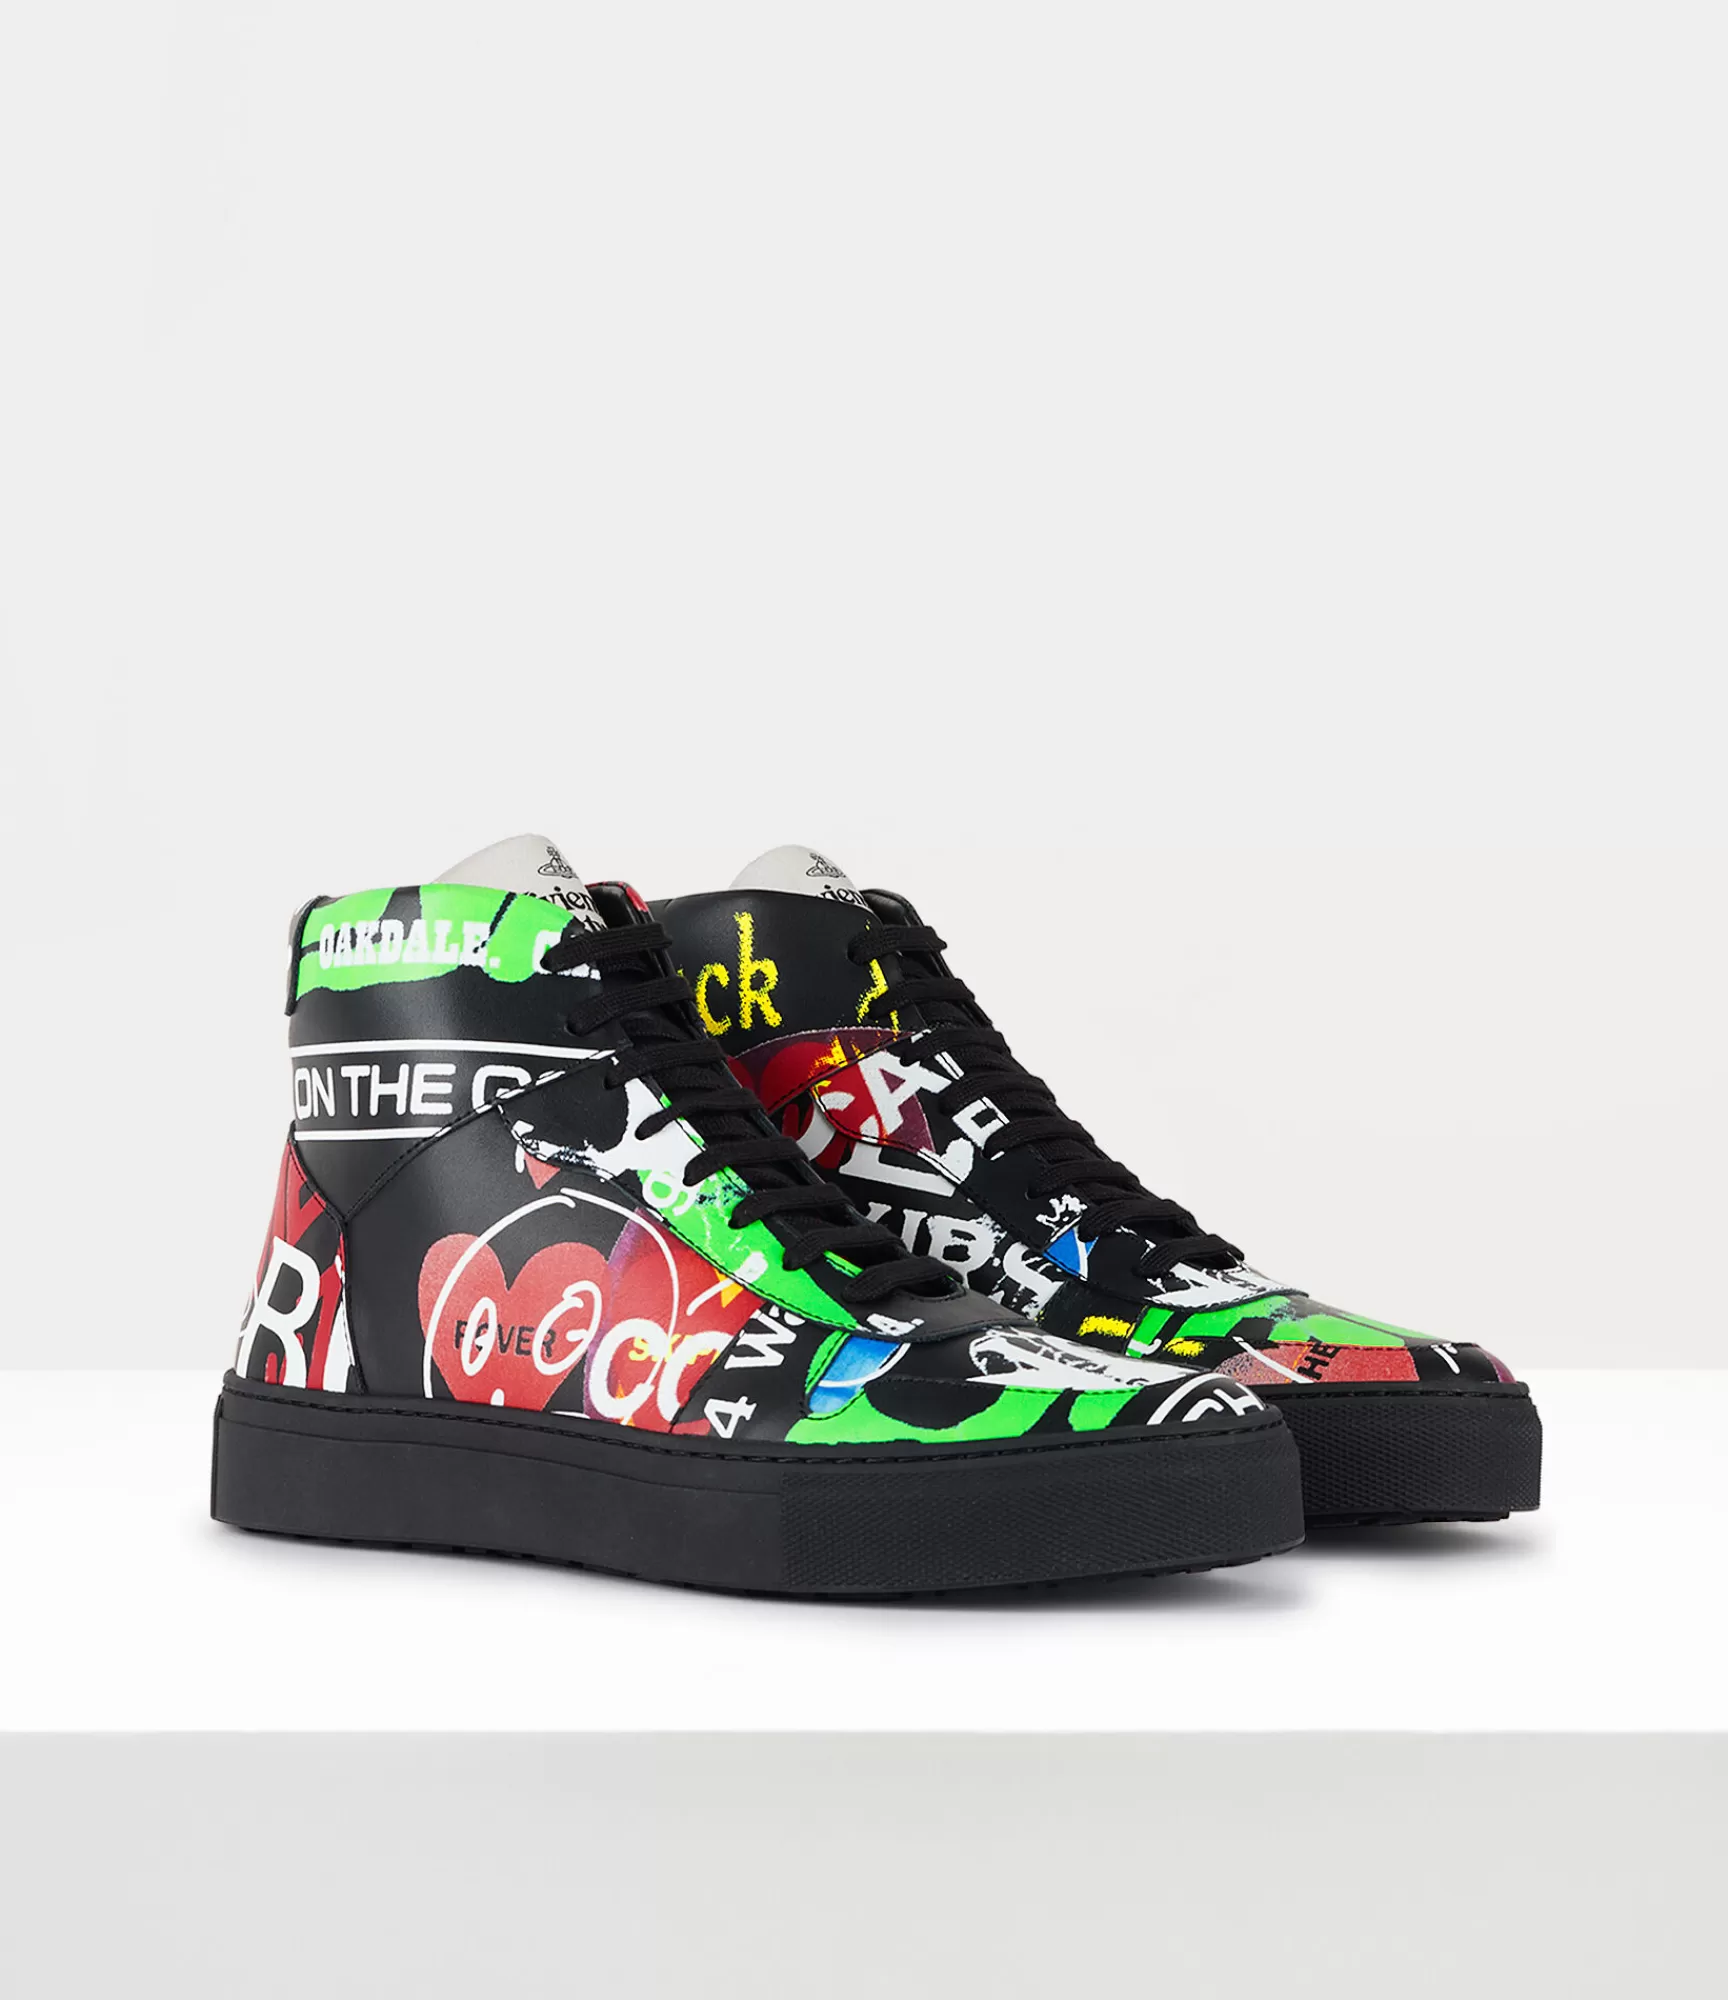 Vivienne Westwood Trainers*Classic trainer high top Print On Black